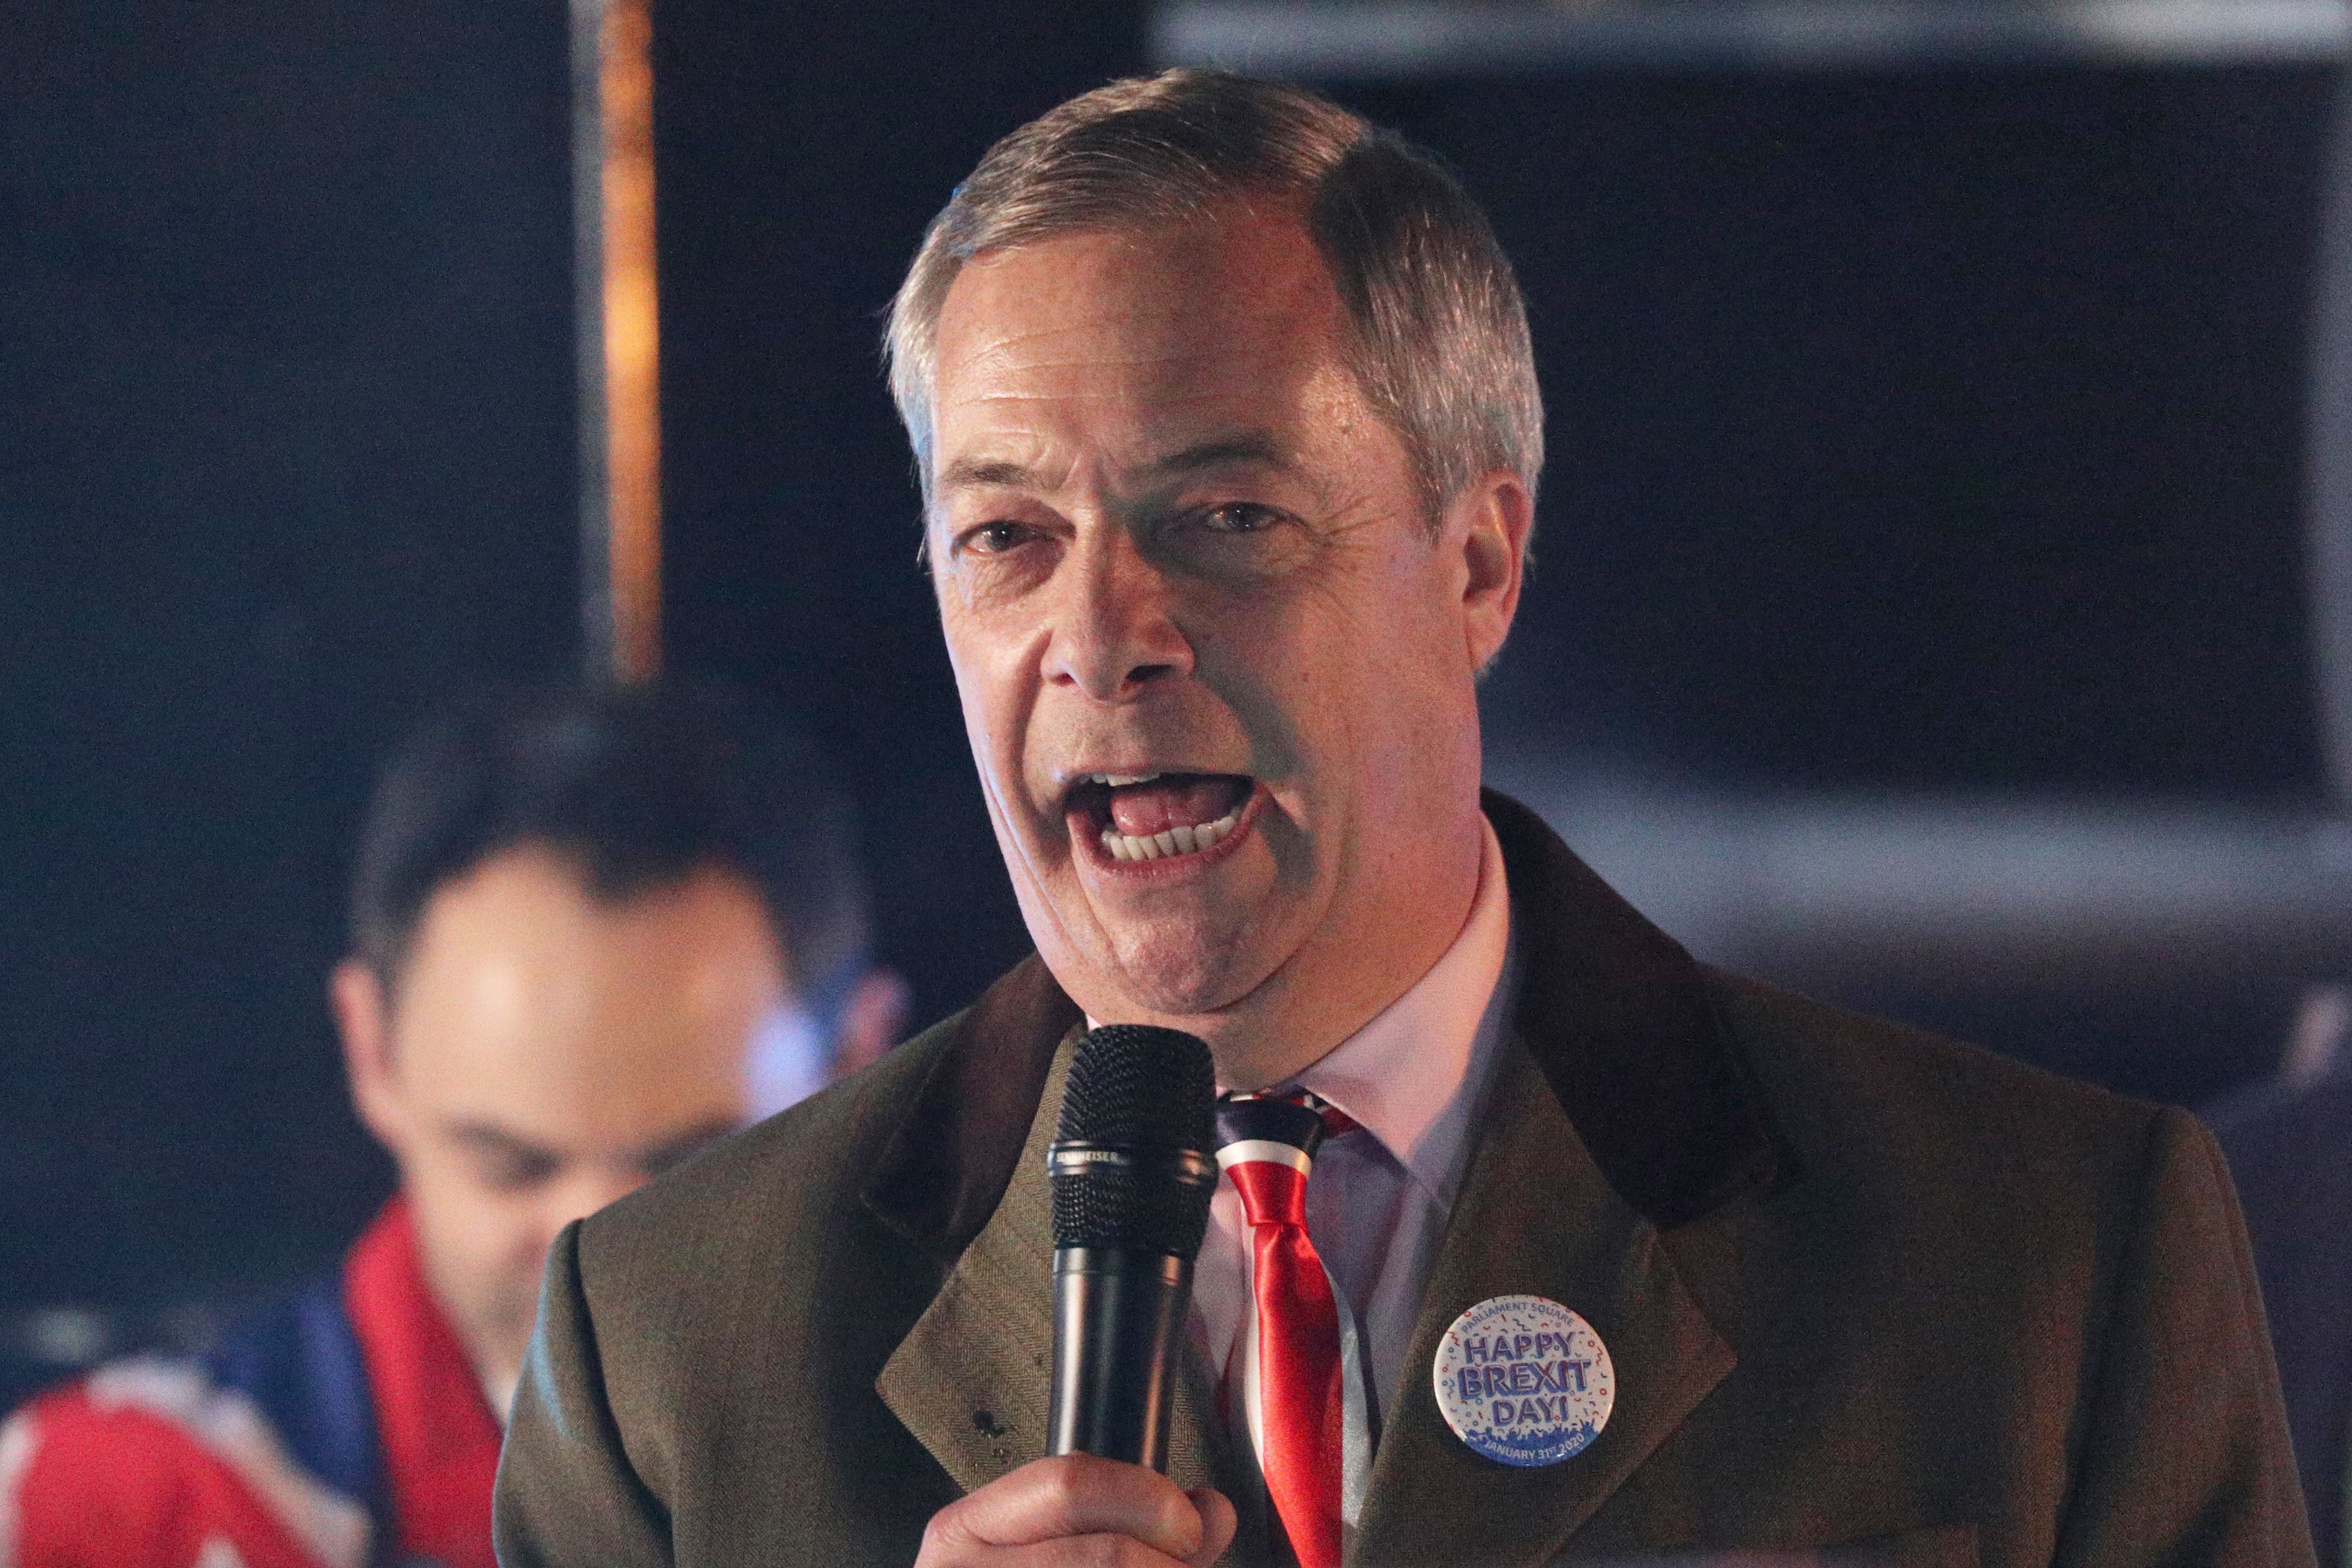 Nigel Farage received an apology from the BBC over its reporting of the banking row